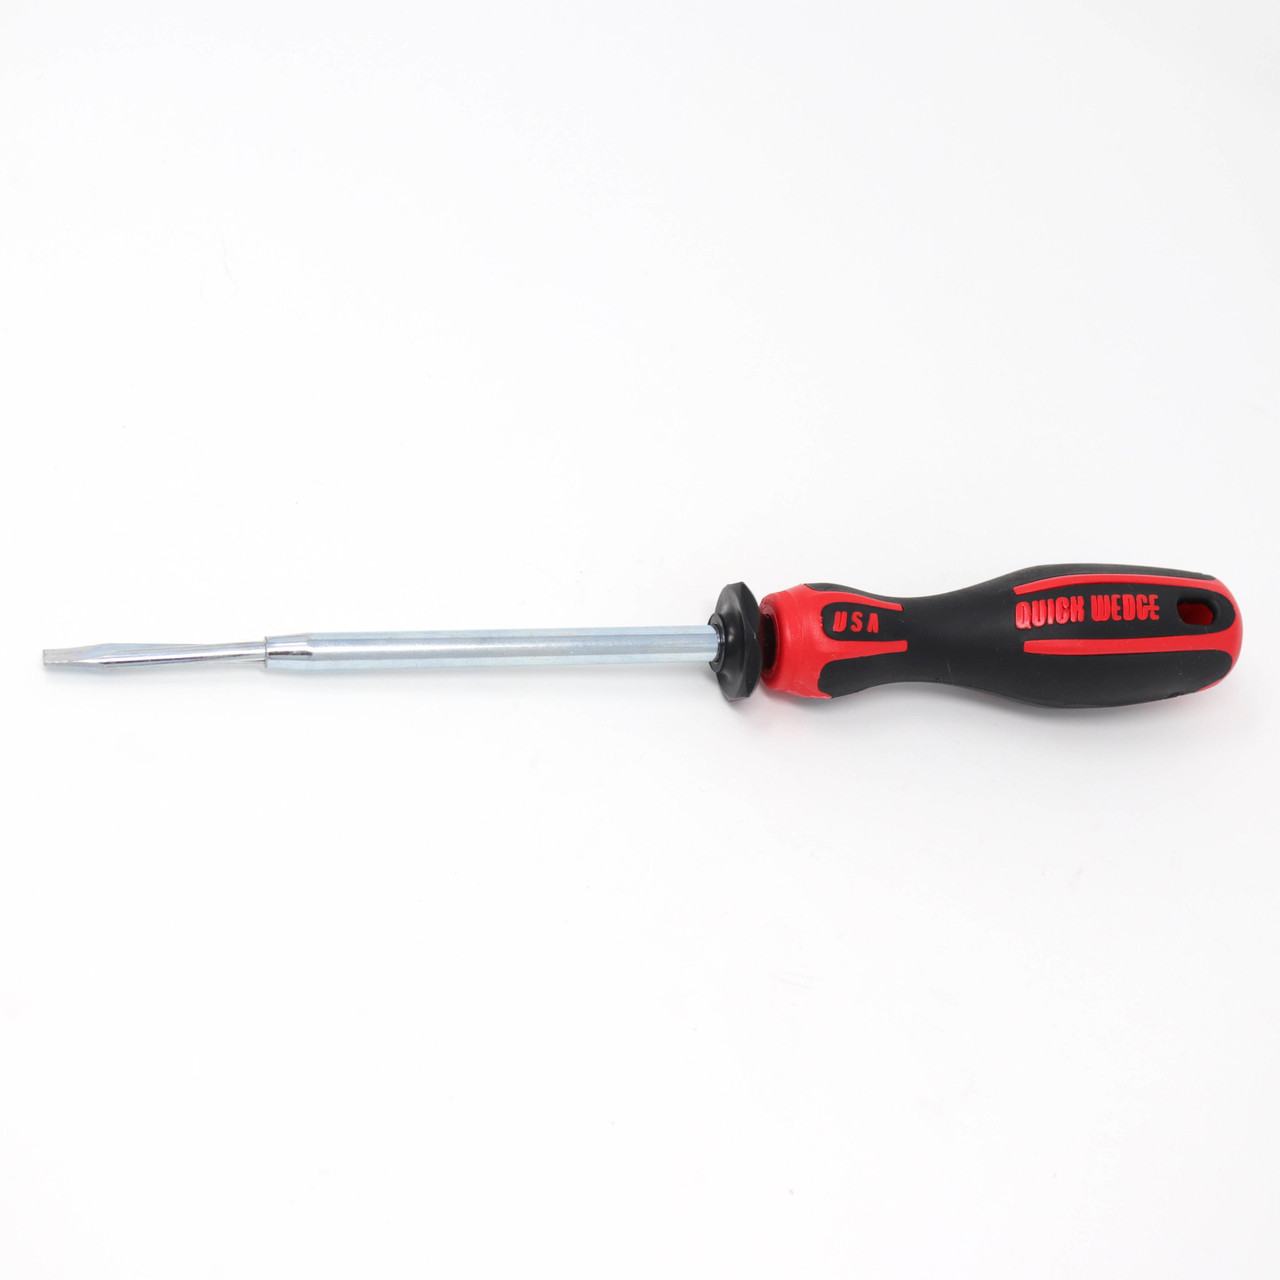 Buy Screw Holding Screwdriver Online at $19.95 - JL Smith & Co